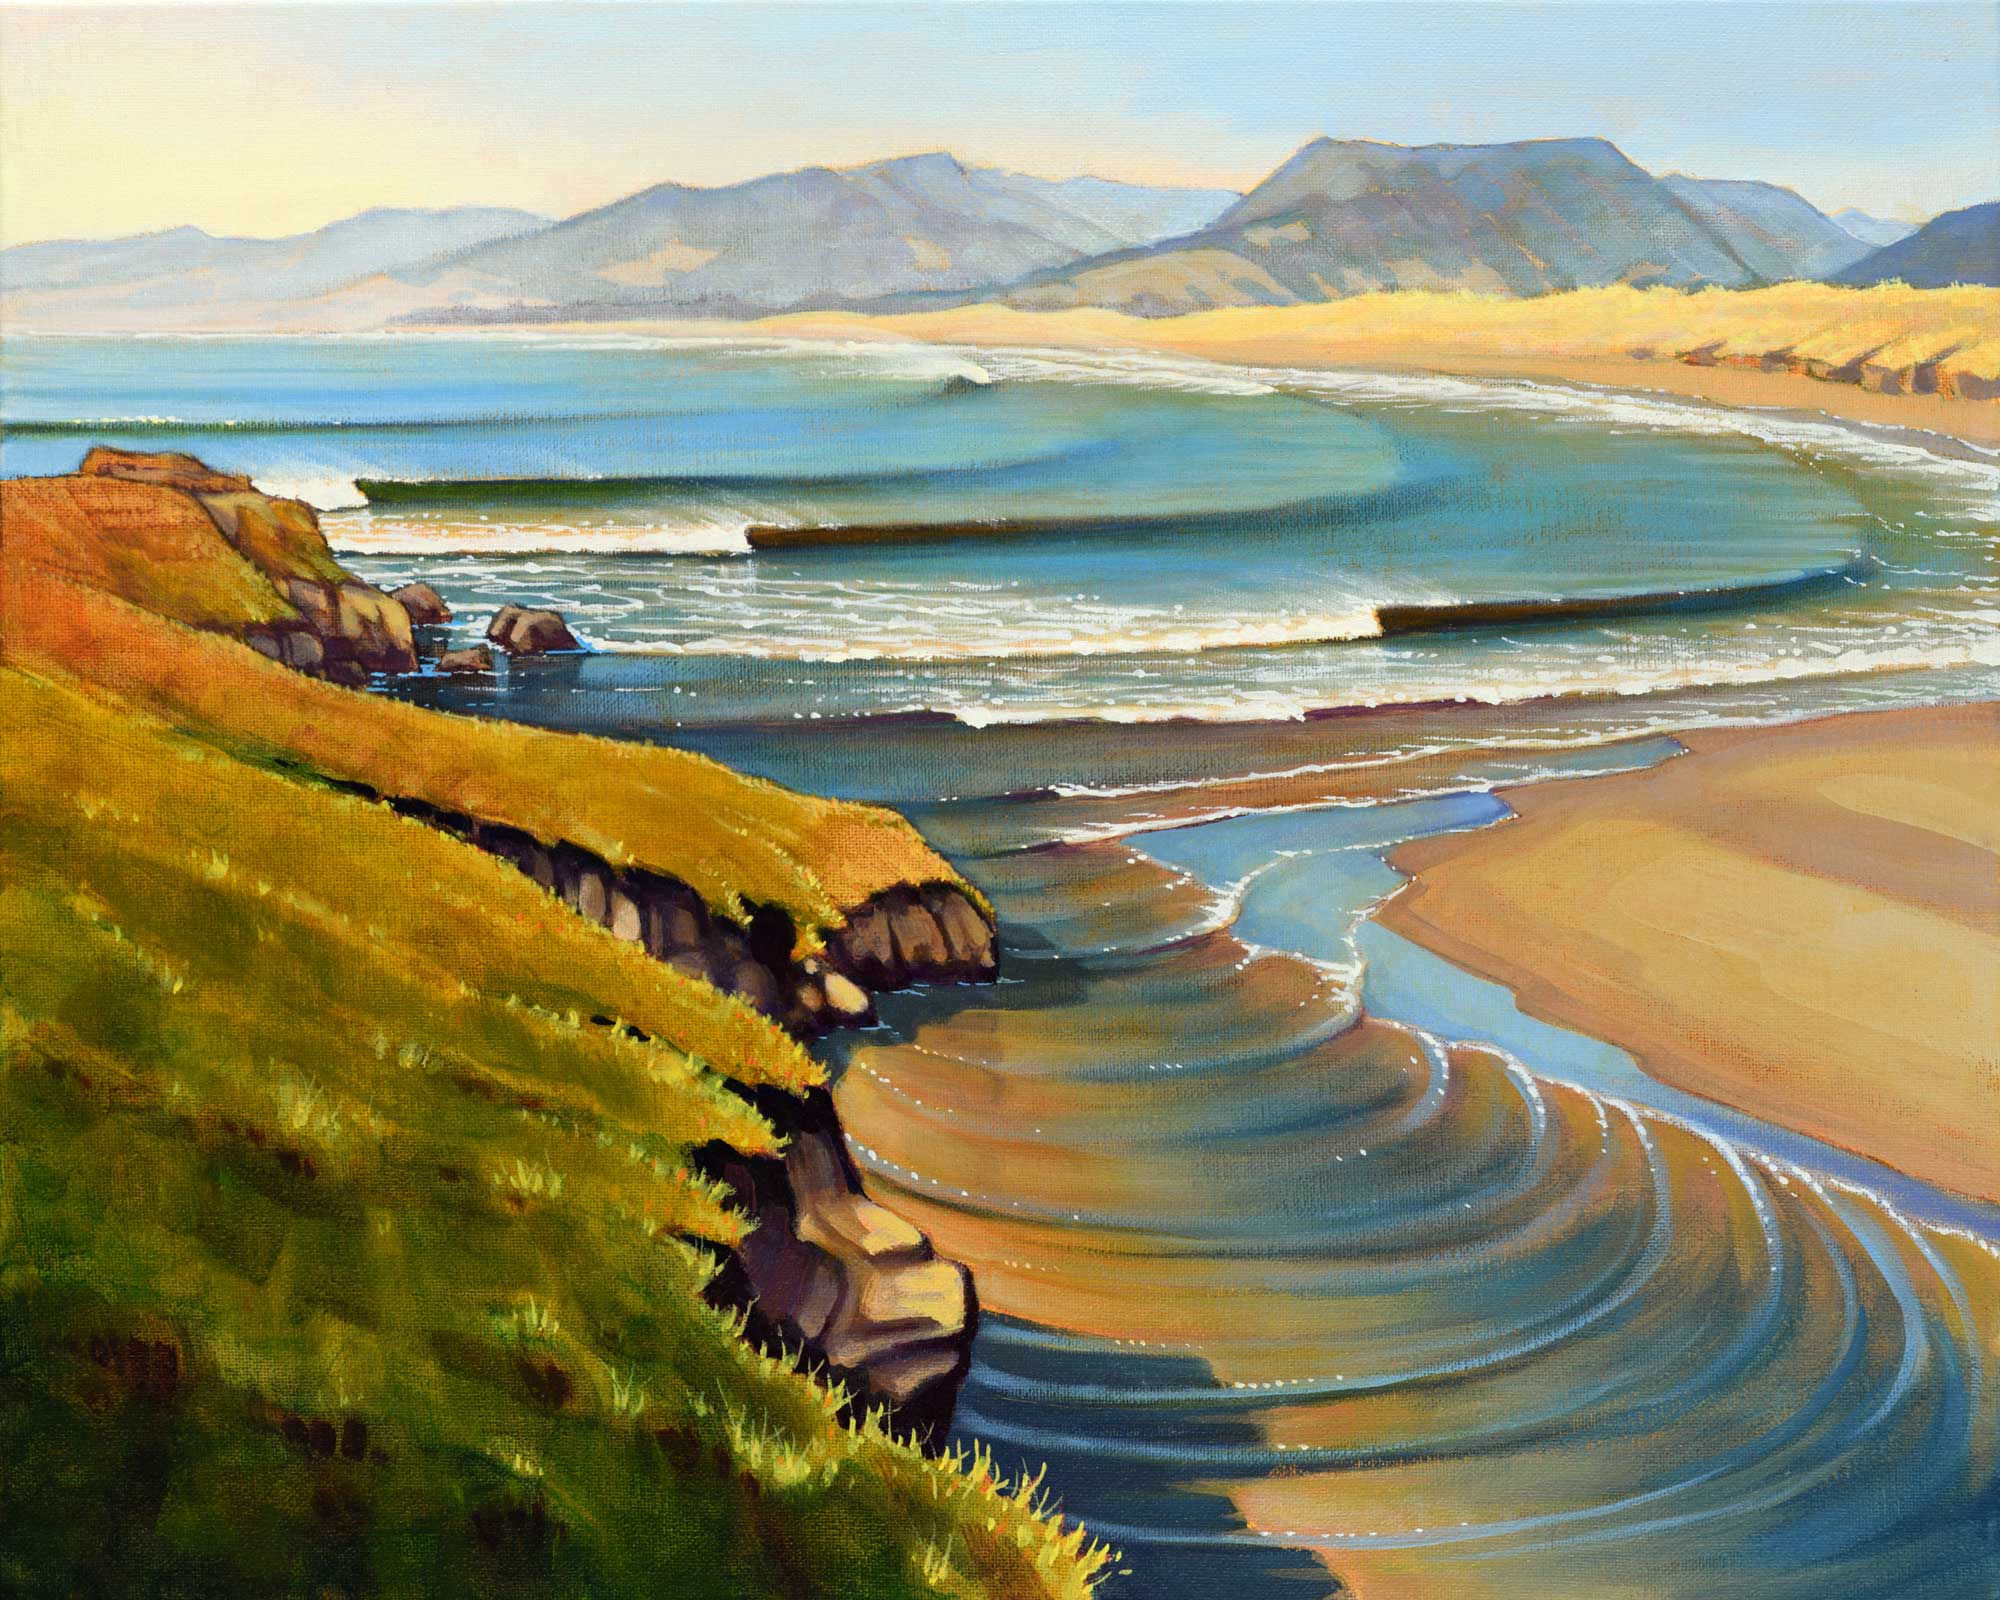 A painting of the Garcia Rivermouth near the Point Arena lighthouse on the Mendocino coast of northern California